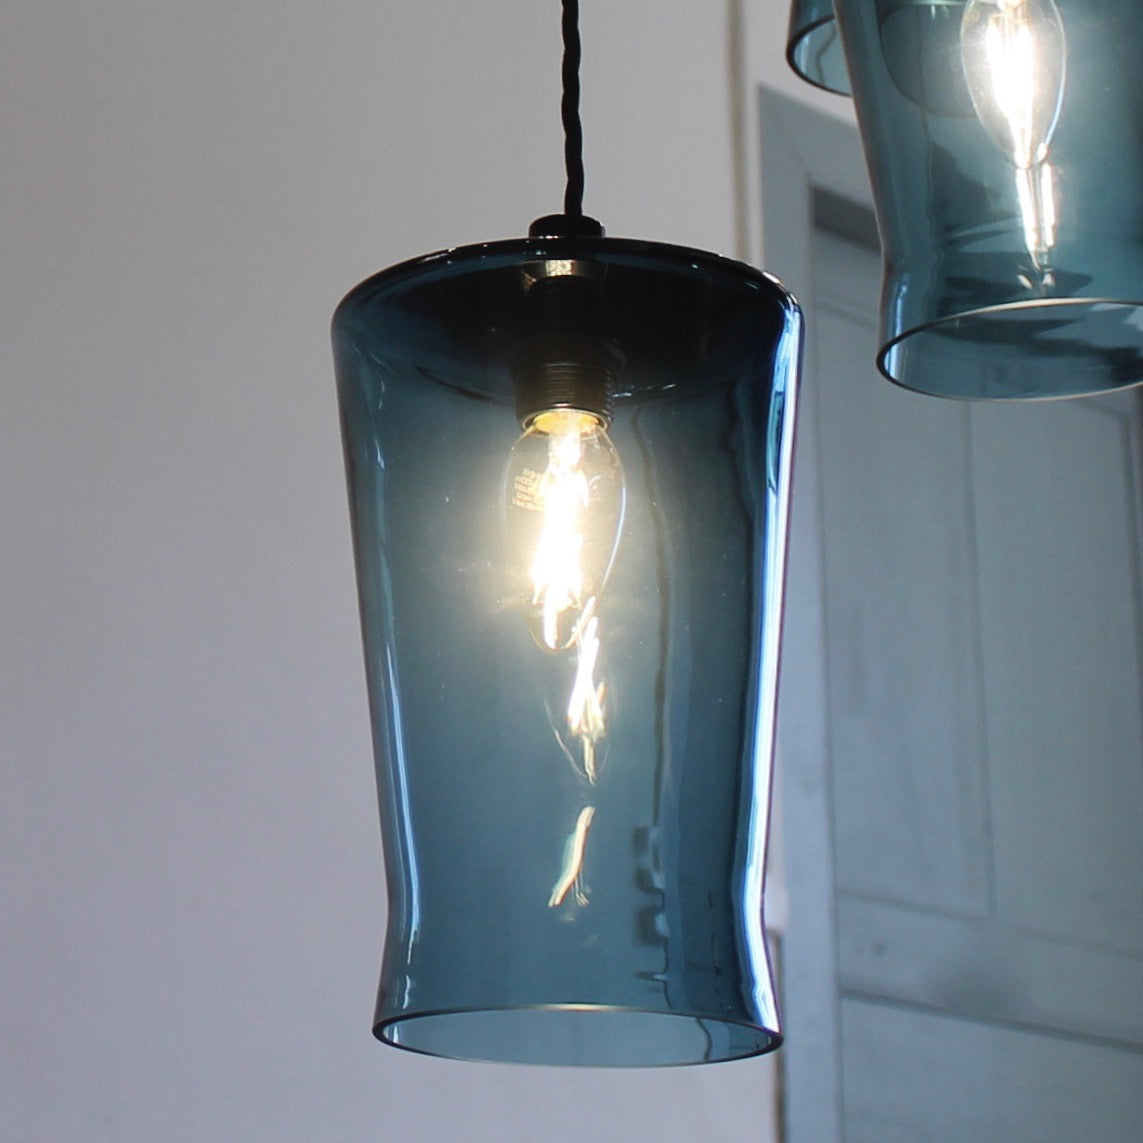 Waisted Flat Top Pendant in Teal Blue, Elegant glass lighting, Contemporary lighting by One Foot Taller, Quality glass pendant